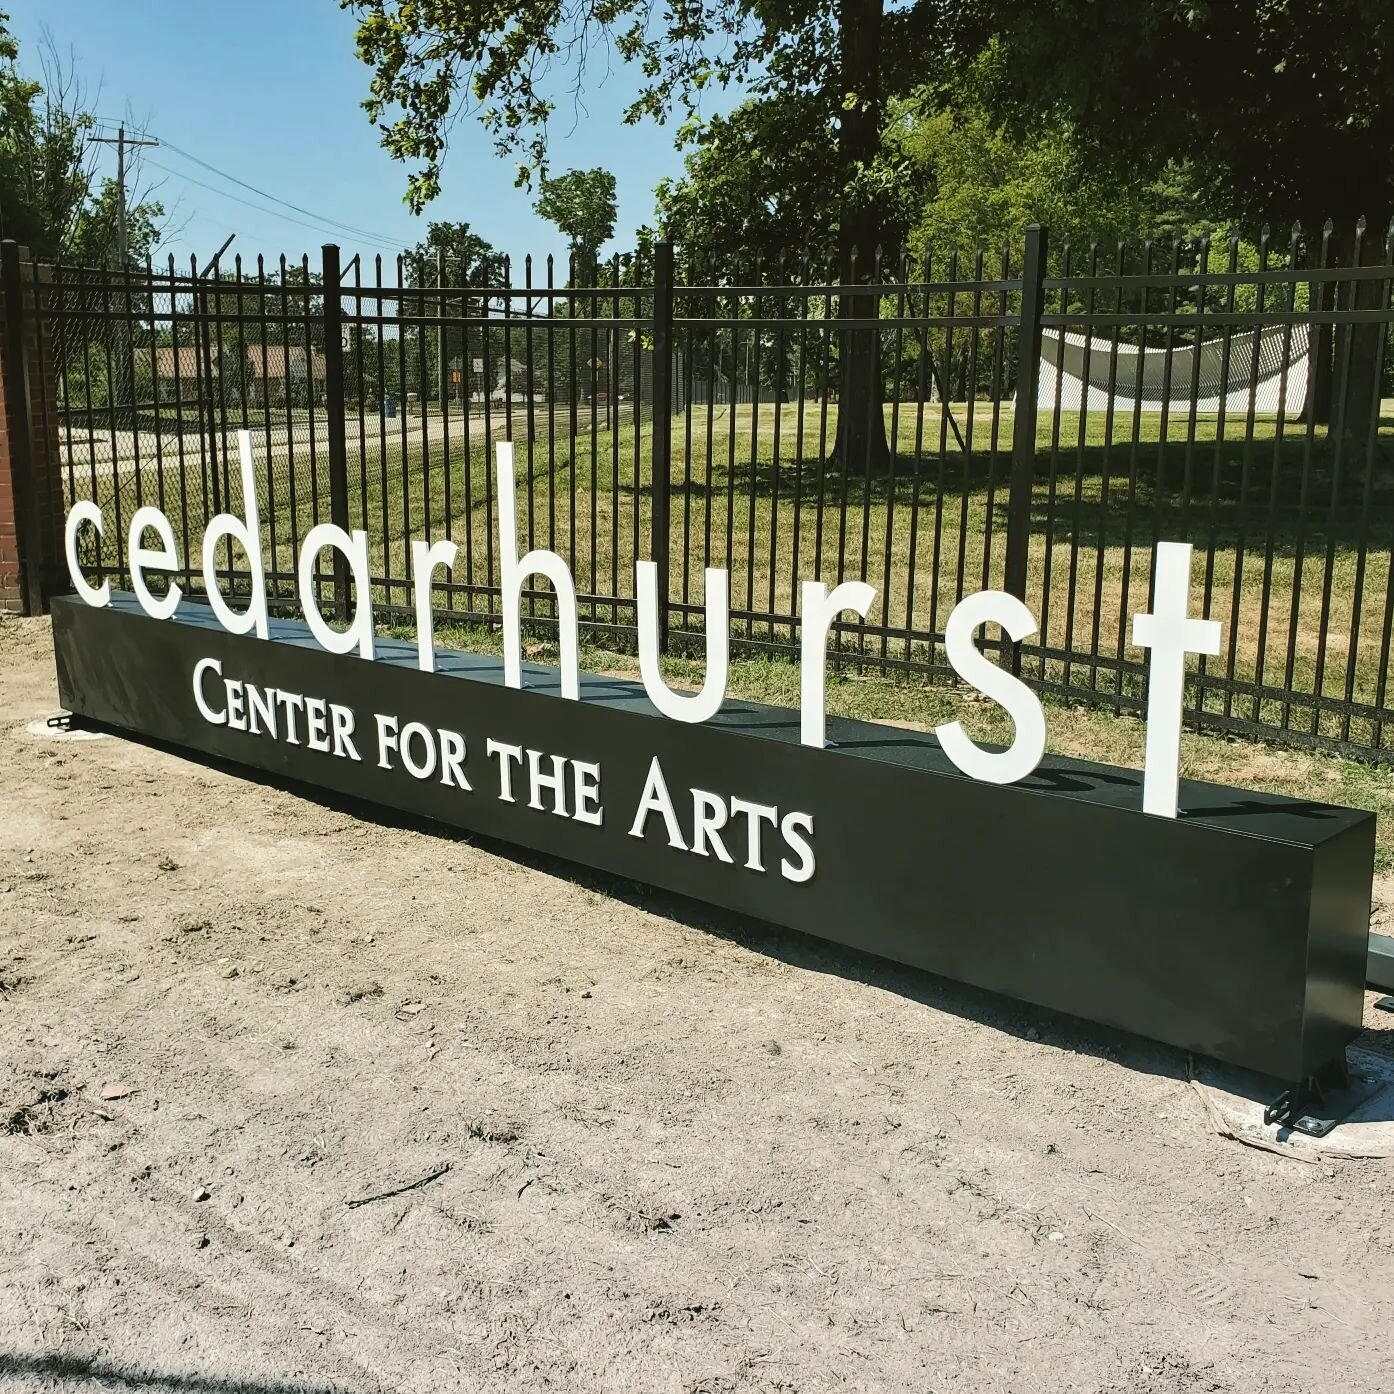 Making some really great progress on this signage for Cedarhurst Center for the Arts. More to come in the next weeks =) 

#sign #metalwork #fabrication #metal #welding #southernillinois #cedarhurst #signage